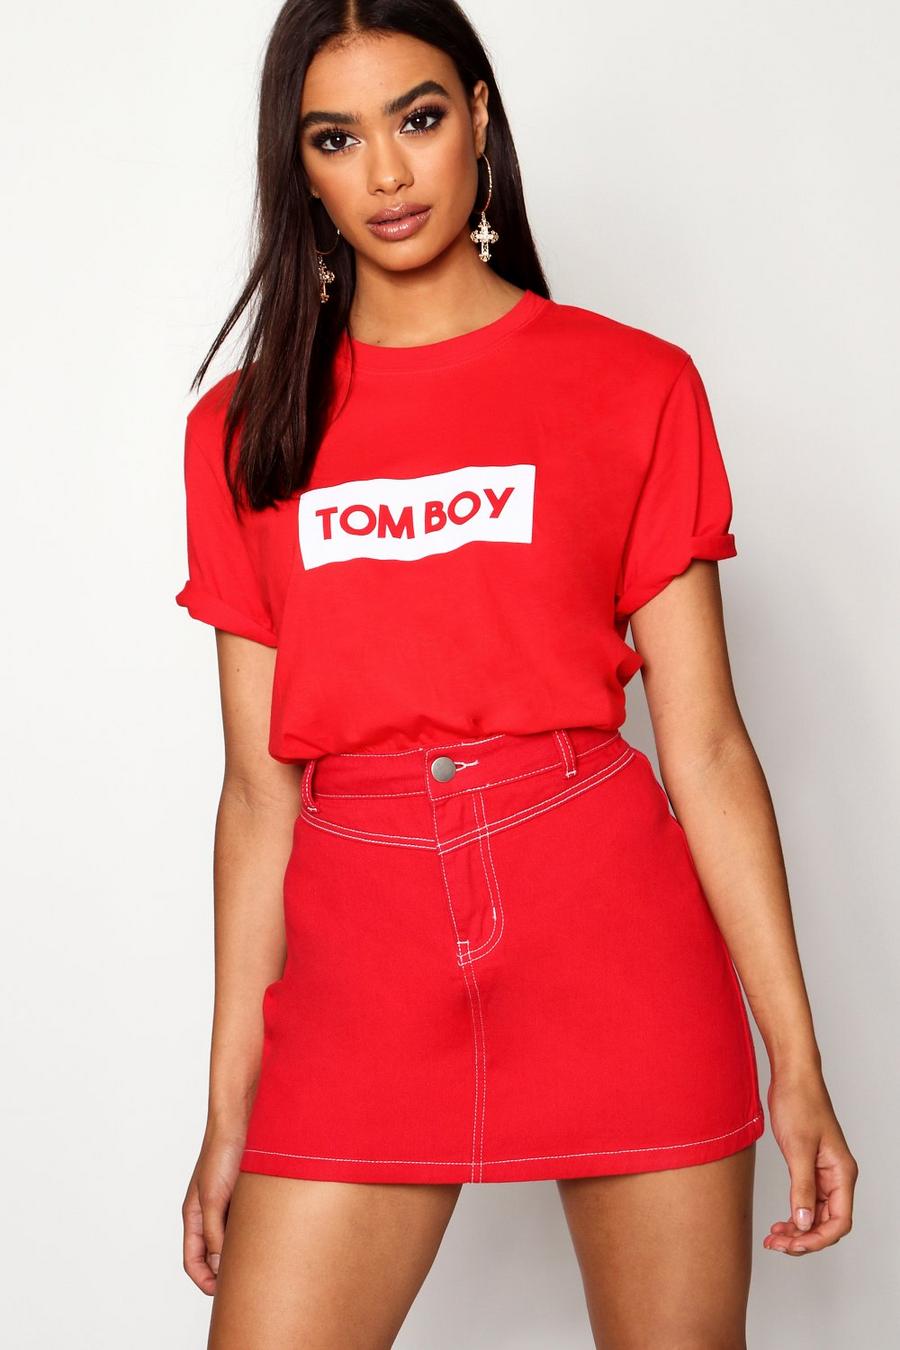 Tomboy Graphic T-Shirt image number 1